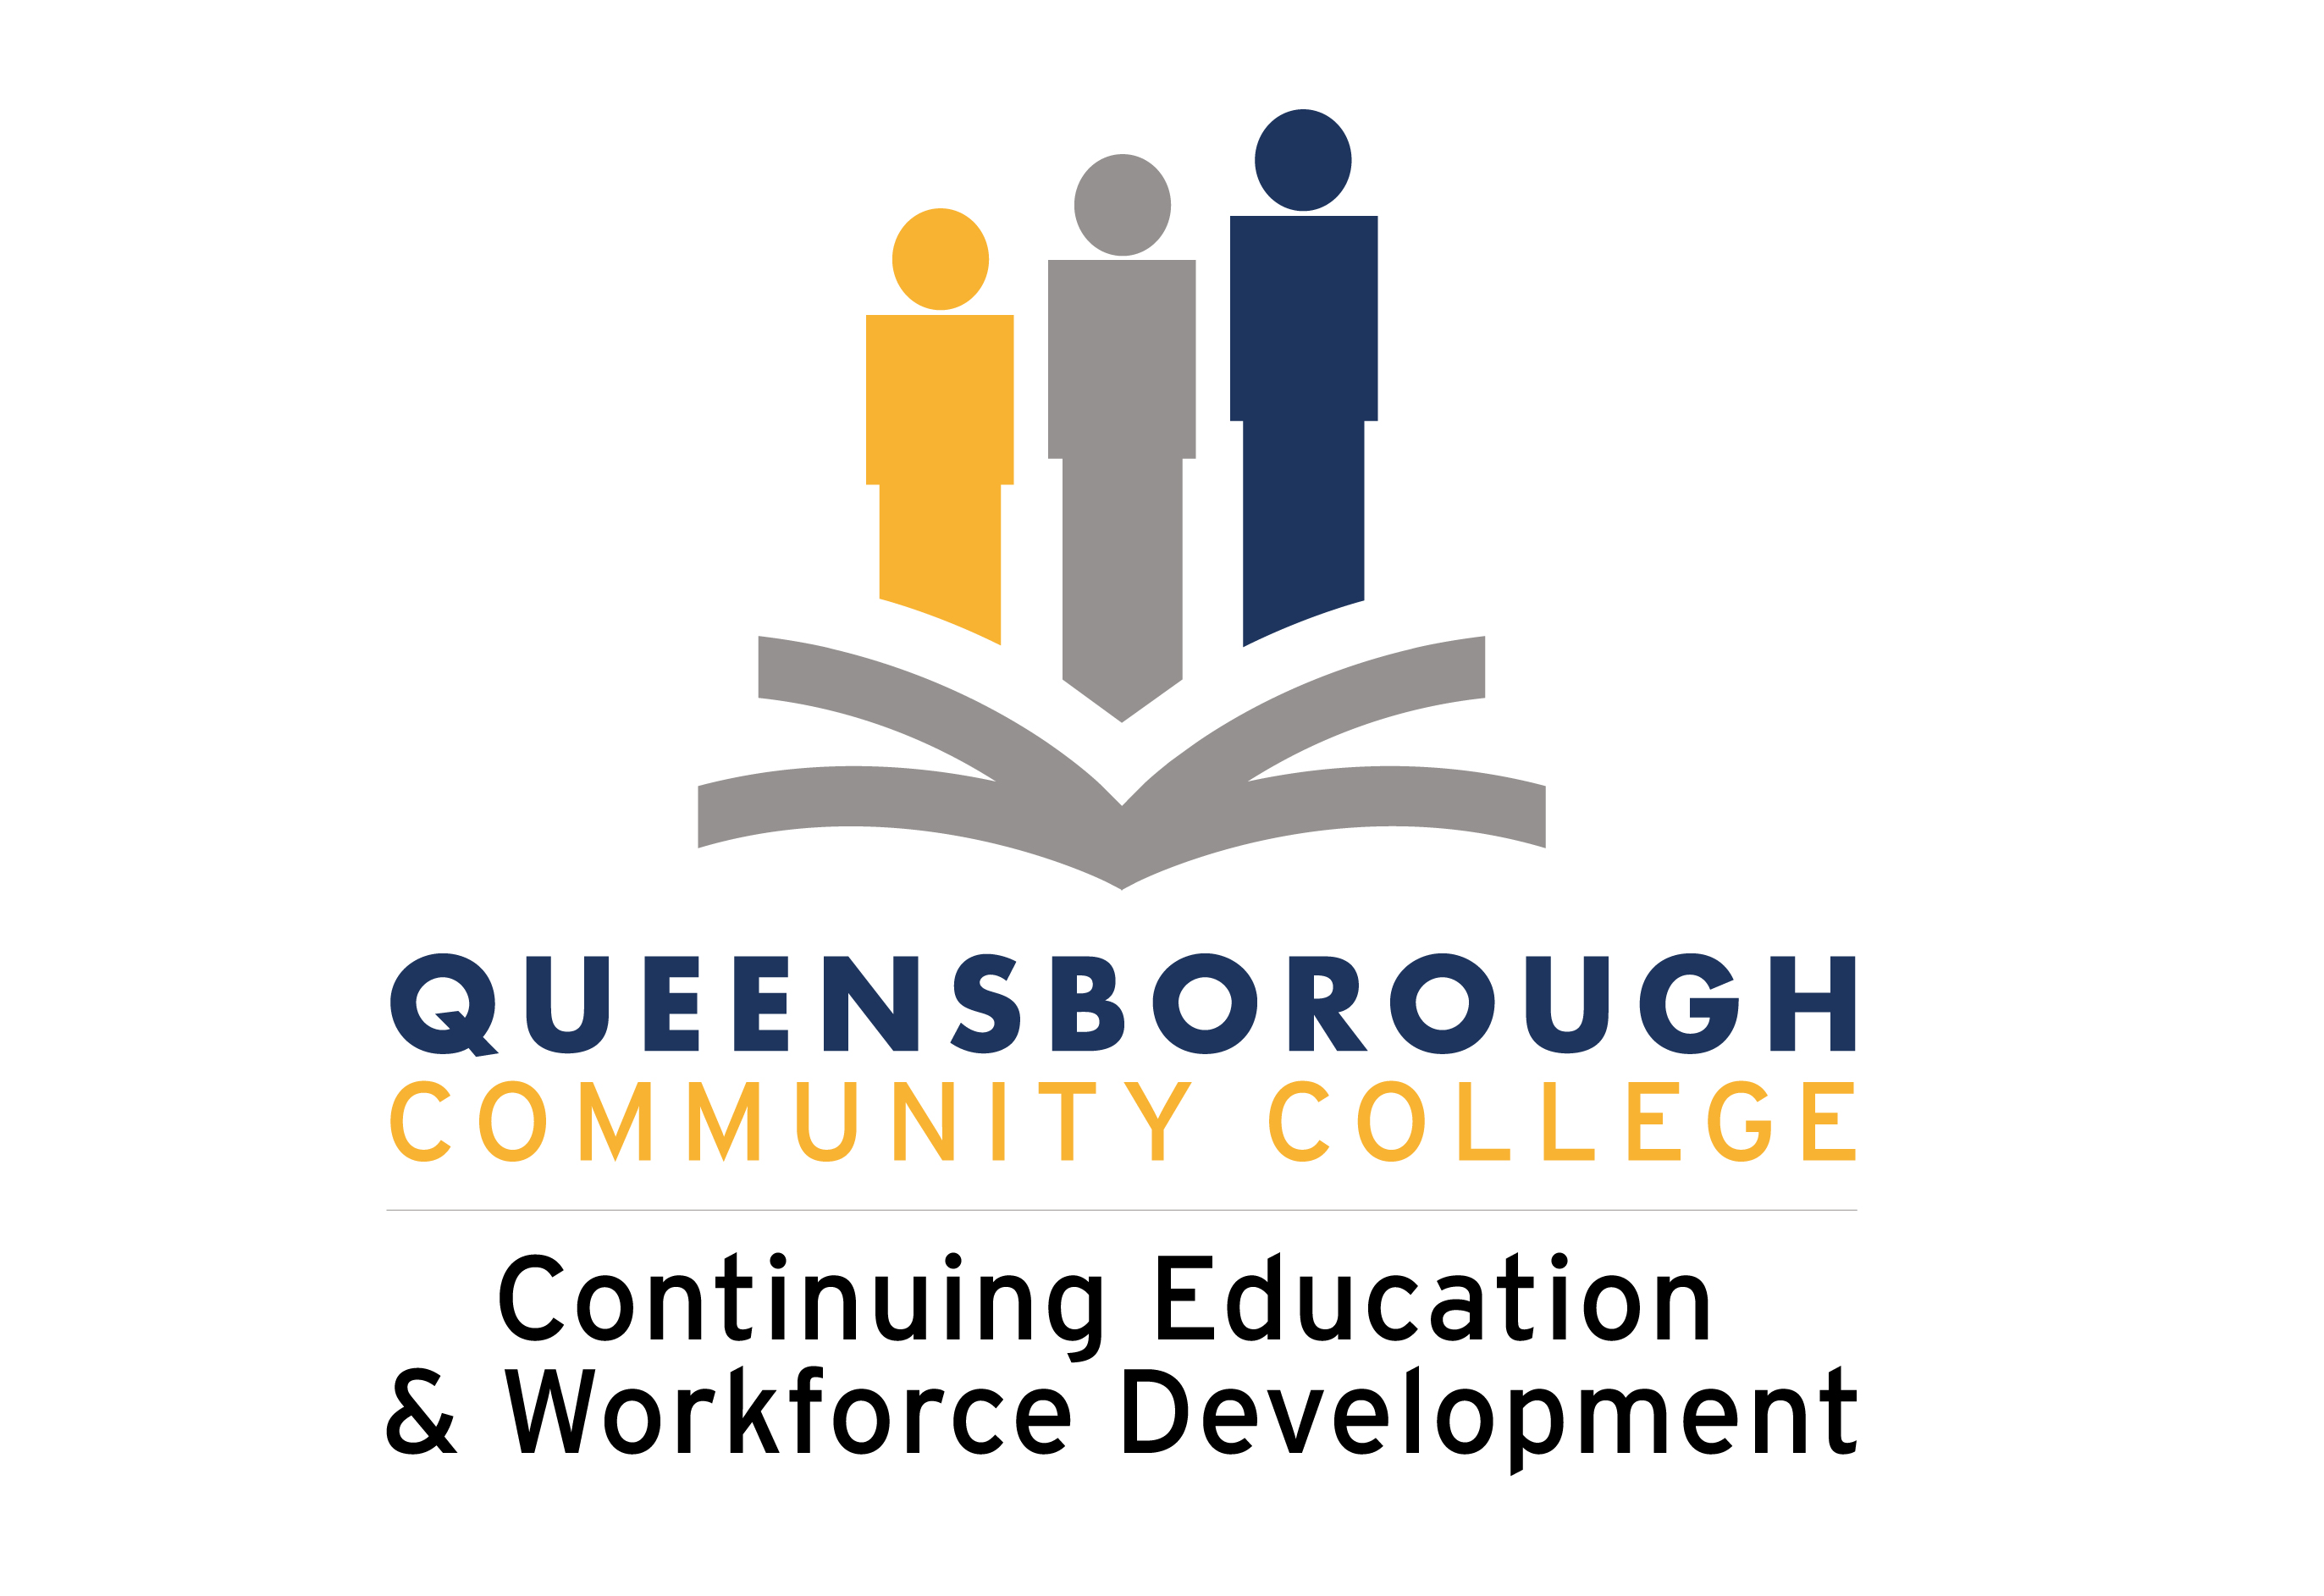 Queensborough Community College Continuing Education and Workforce Development vertical layout logo